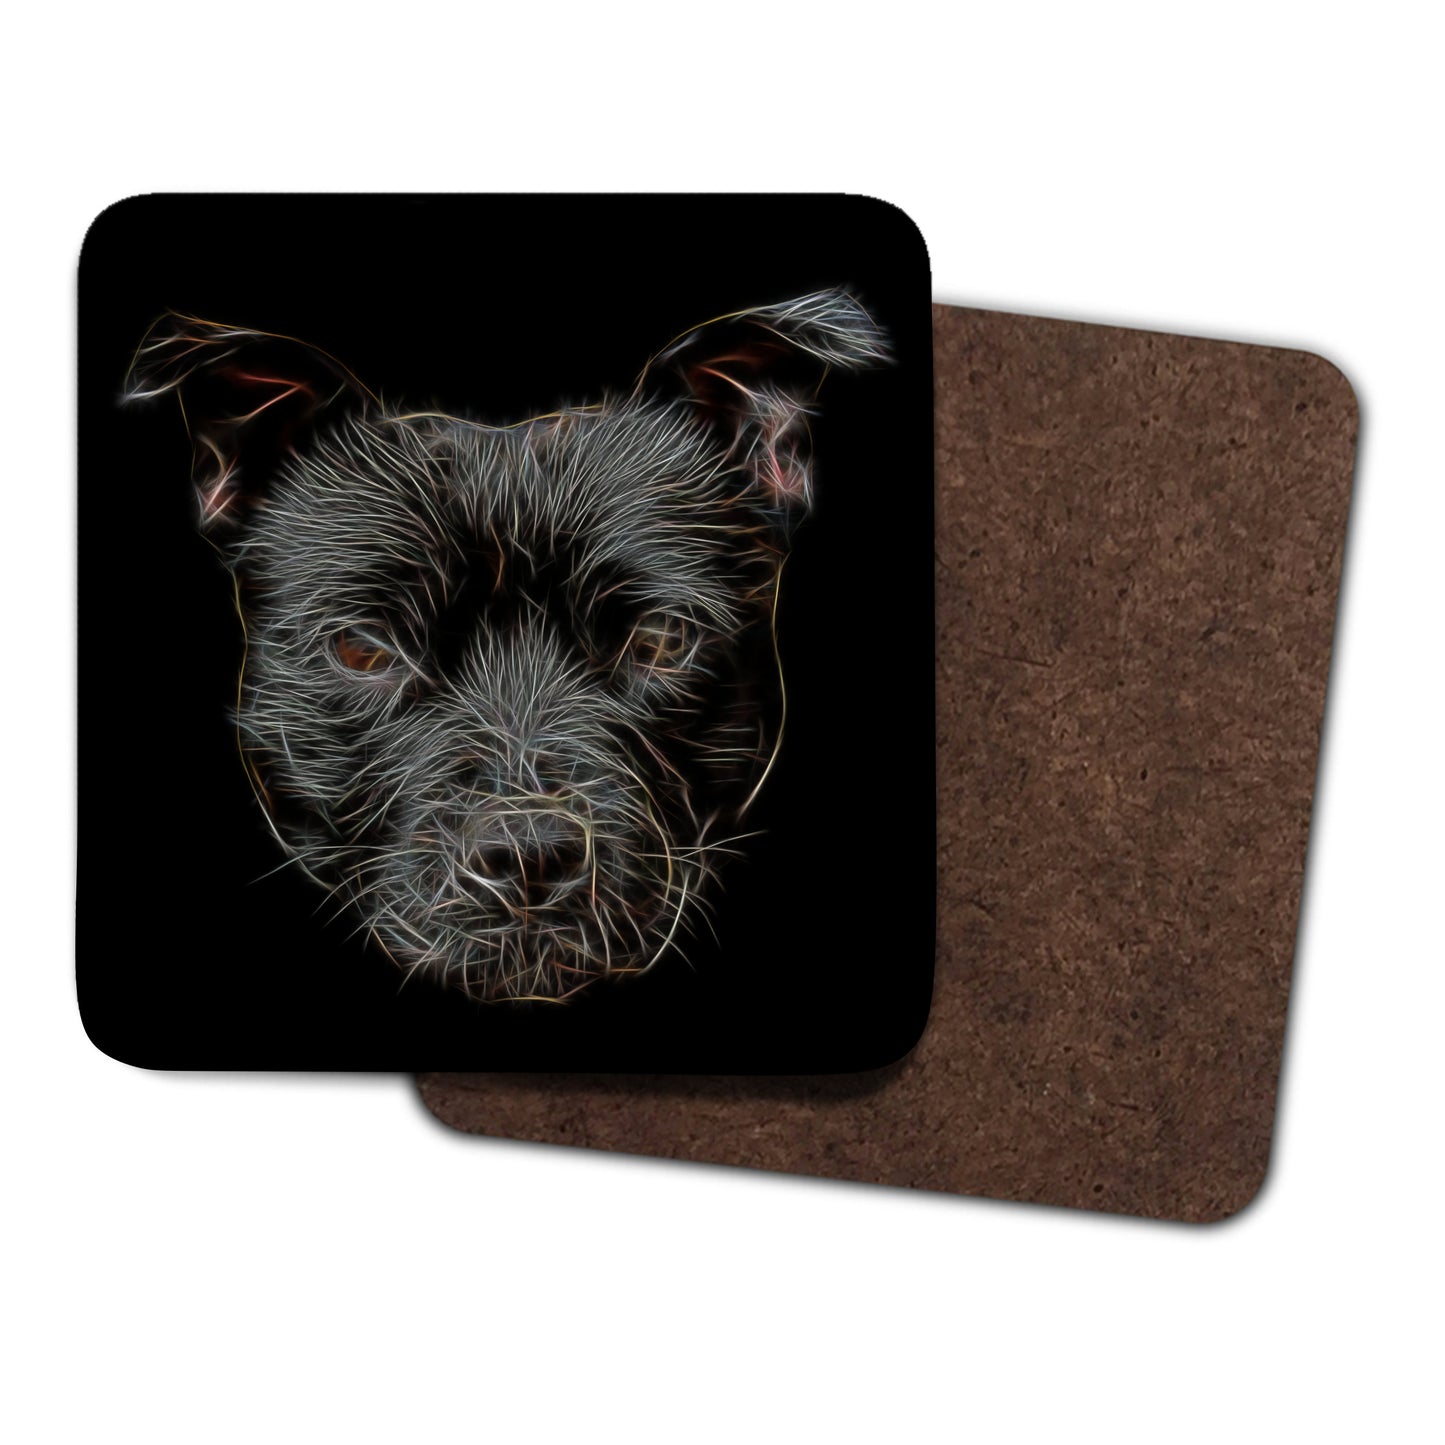 Black Staffordshire Bull Terrier Coasters, Set of 4, with Stunning Fractal Art Design. Perfect Dog Owner Gift.